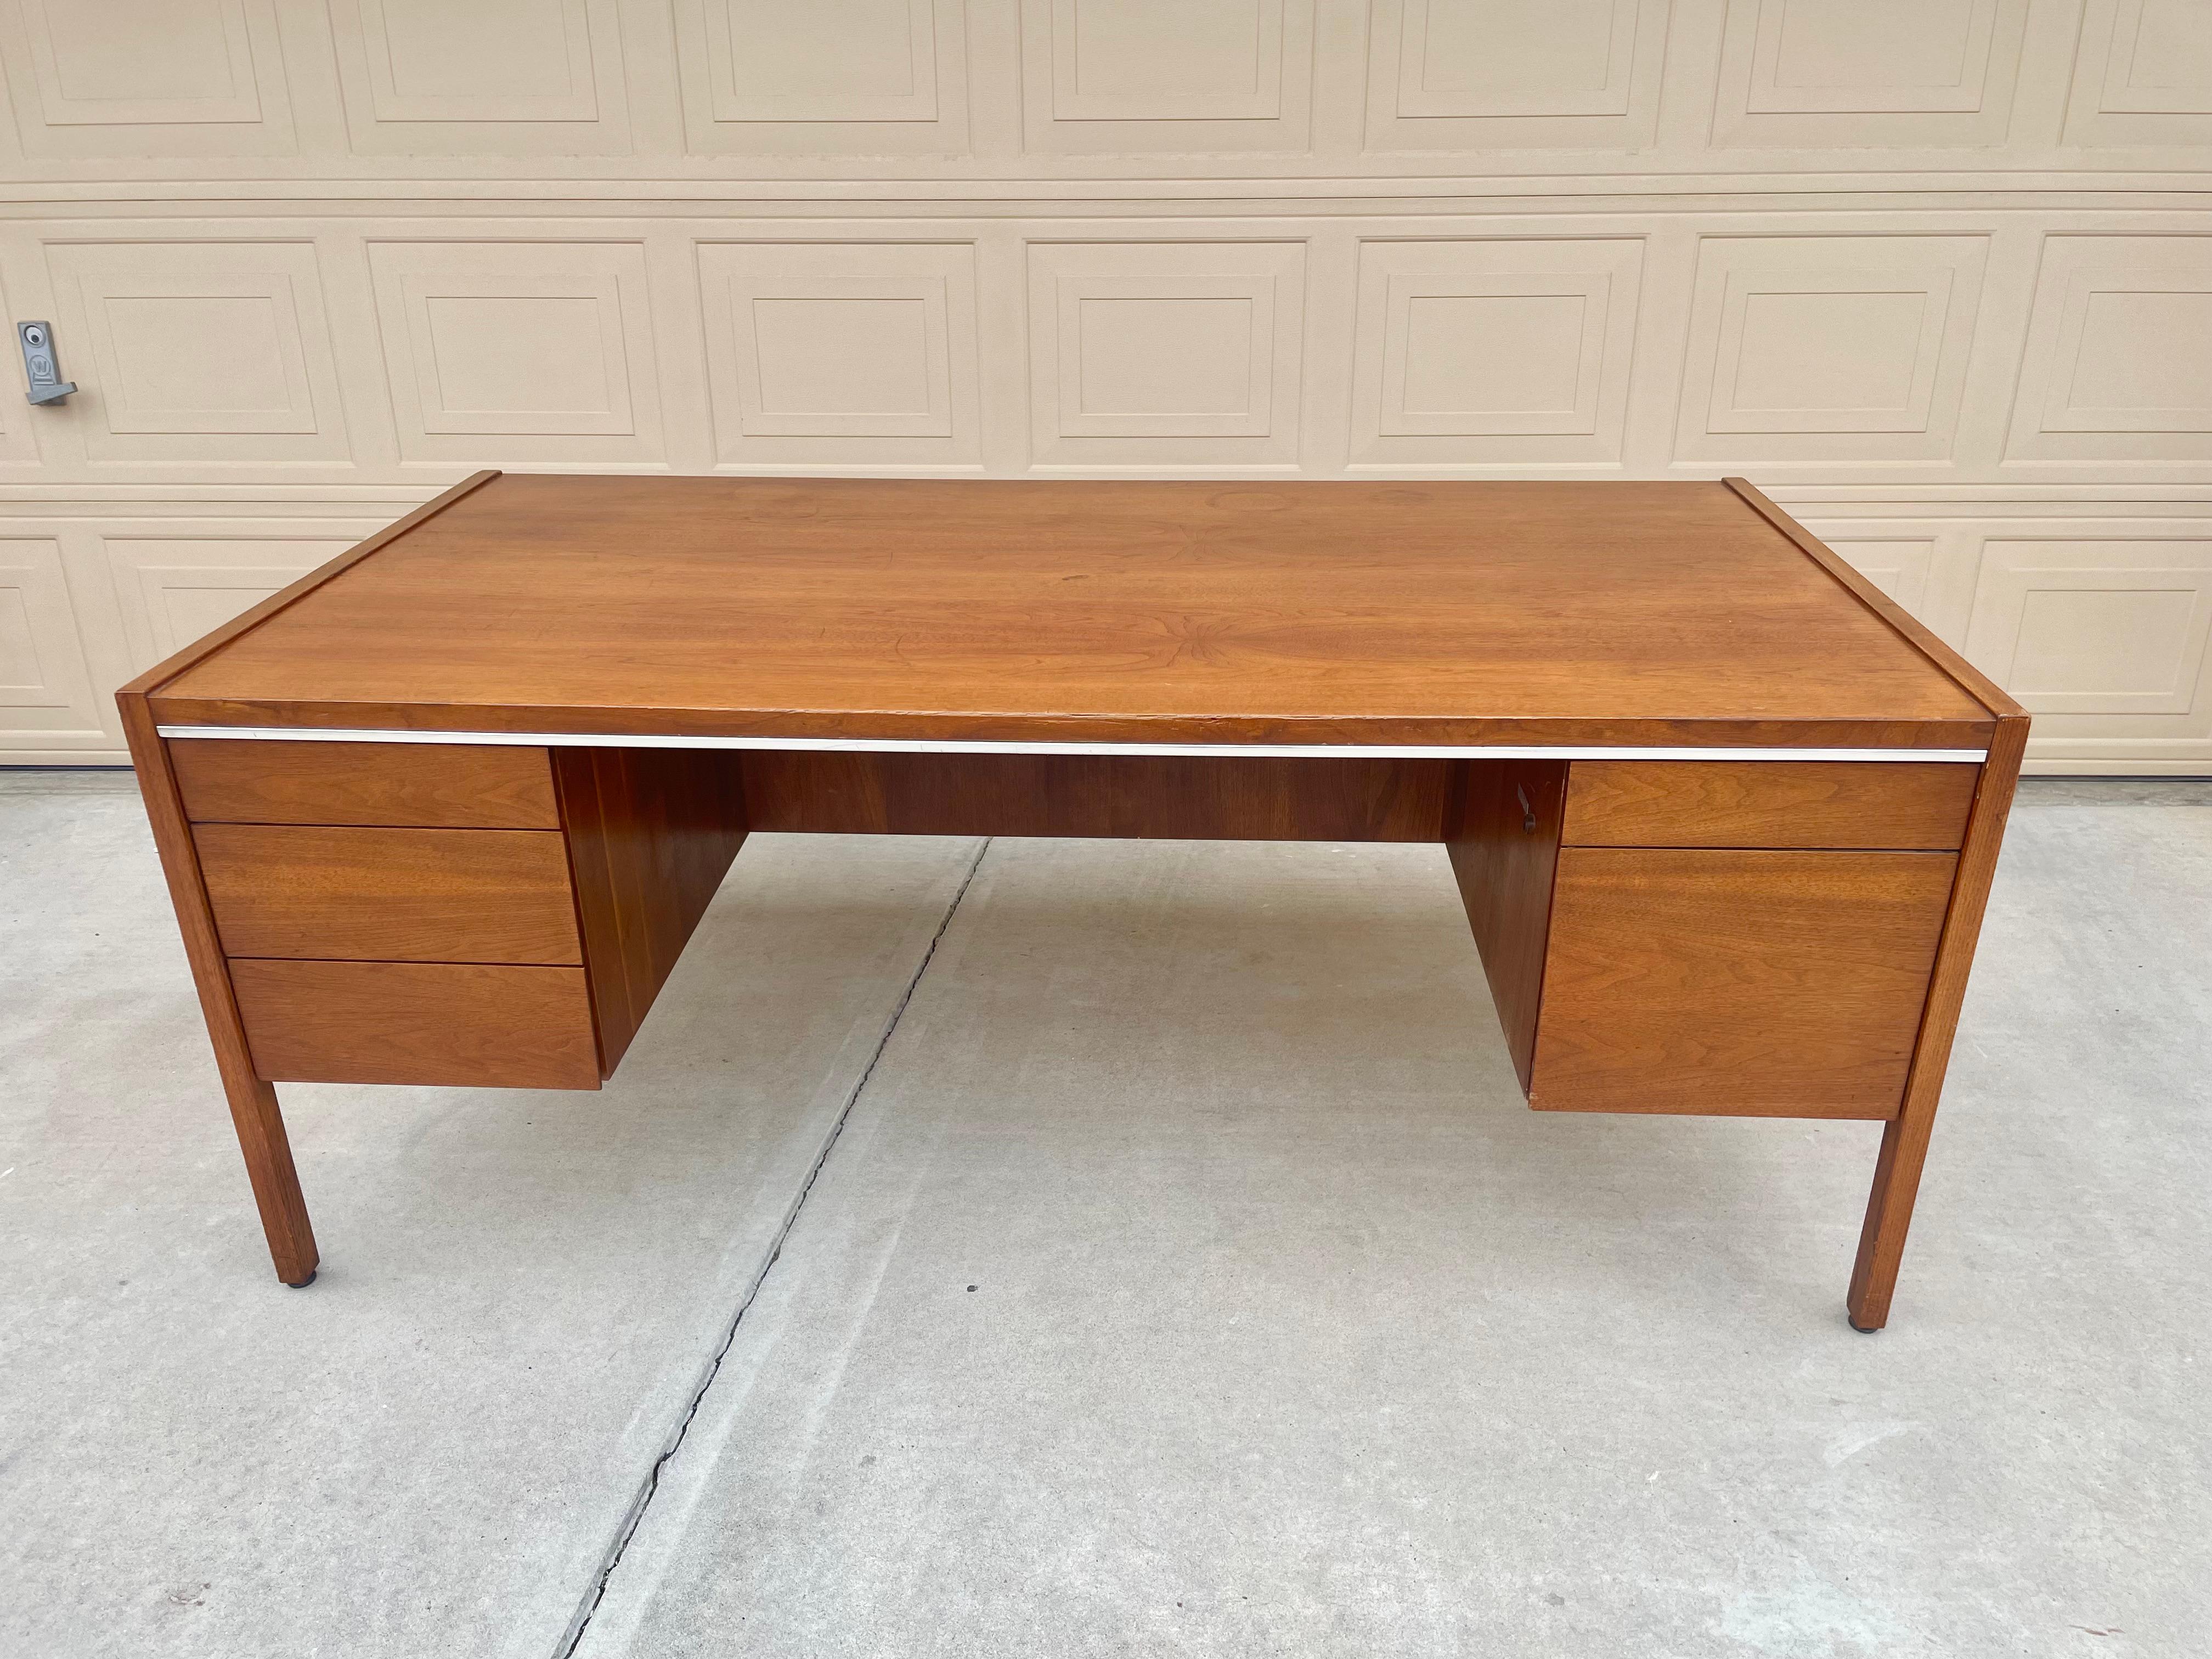 Mid century walnut executive desk designed Borg Warner for Kimball in the United States, circa 1960s. This stunning desk features a strong solid walnut frame that gives an excellent color tone and a beautiful grain pattern. The desk consists of four